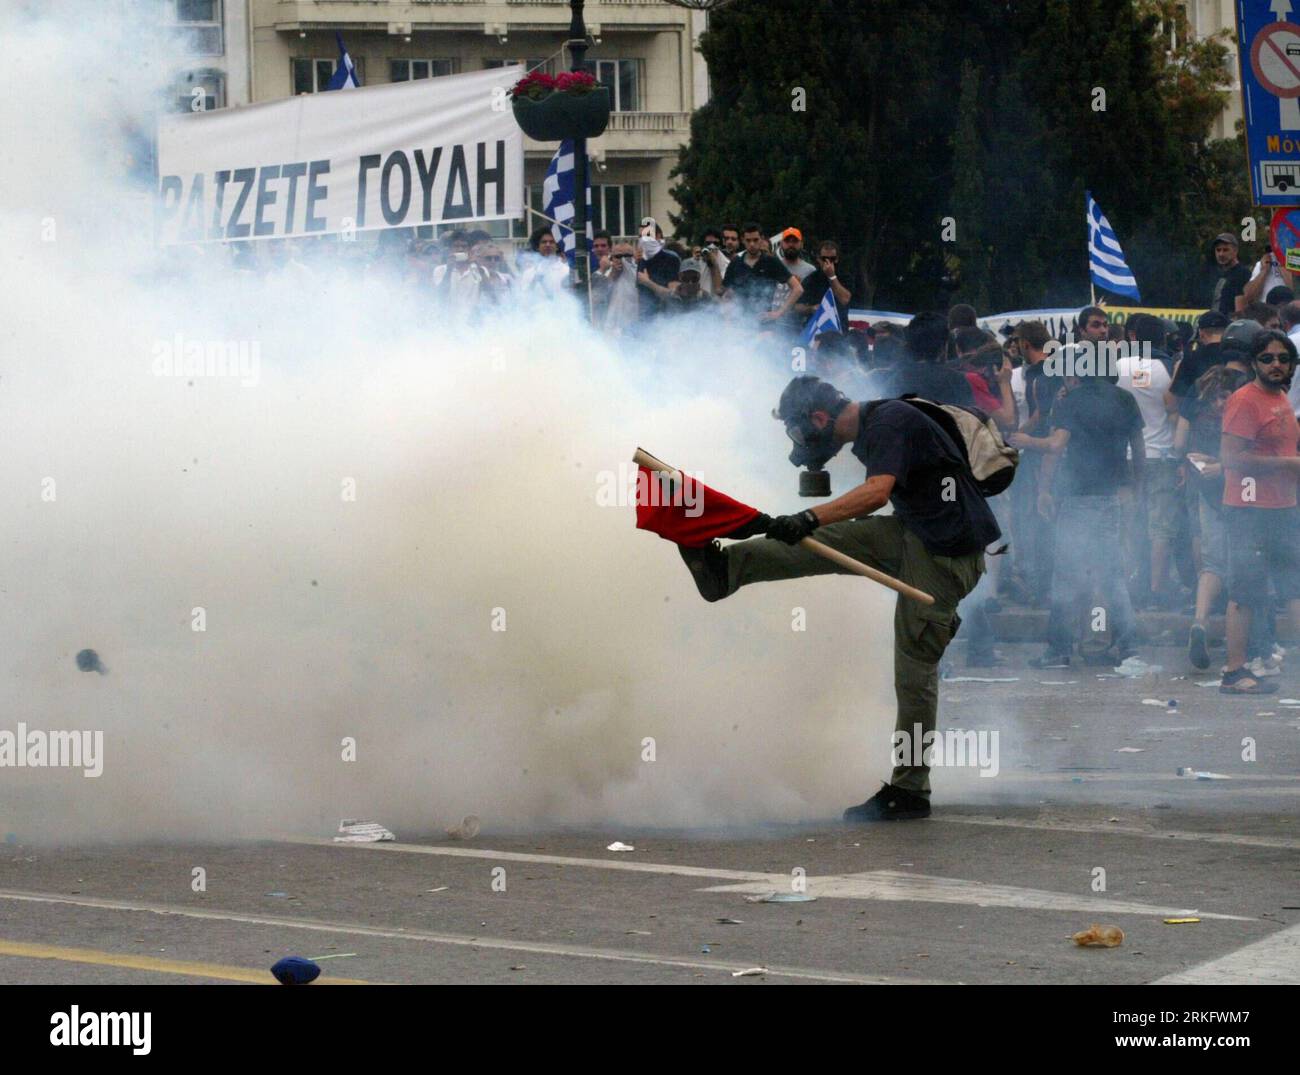 Bildnummer: 55460674  Datum: 15.06.2011  Copyright: imago/Xinhua (110615) -- ATHENS, June 15, 2011 (Xinhua) -- Anti-riot policemen fire tear gas at demonstrators at the Constitution Square in Athens, Greece, June 15, 2011. A new 24-hour nationwide general strike hit Greece Wednesday in protest at further austerity measures planned by the Greek government to counter its acute debt crisis. (Xinhua/Marios Lolos) (wjd) GREECE-AUSTERITY MEASURES-PROTEST PUBLICATIONxNOTxINxCHN Politik Proteste GRE x0x xkg 2011 quer     Bildnummer 55460674 Date 15 06 2011 Copyright Imago XINHUA  Athens June 15 2011 X Stock Photo